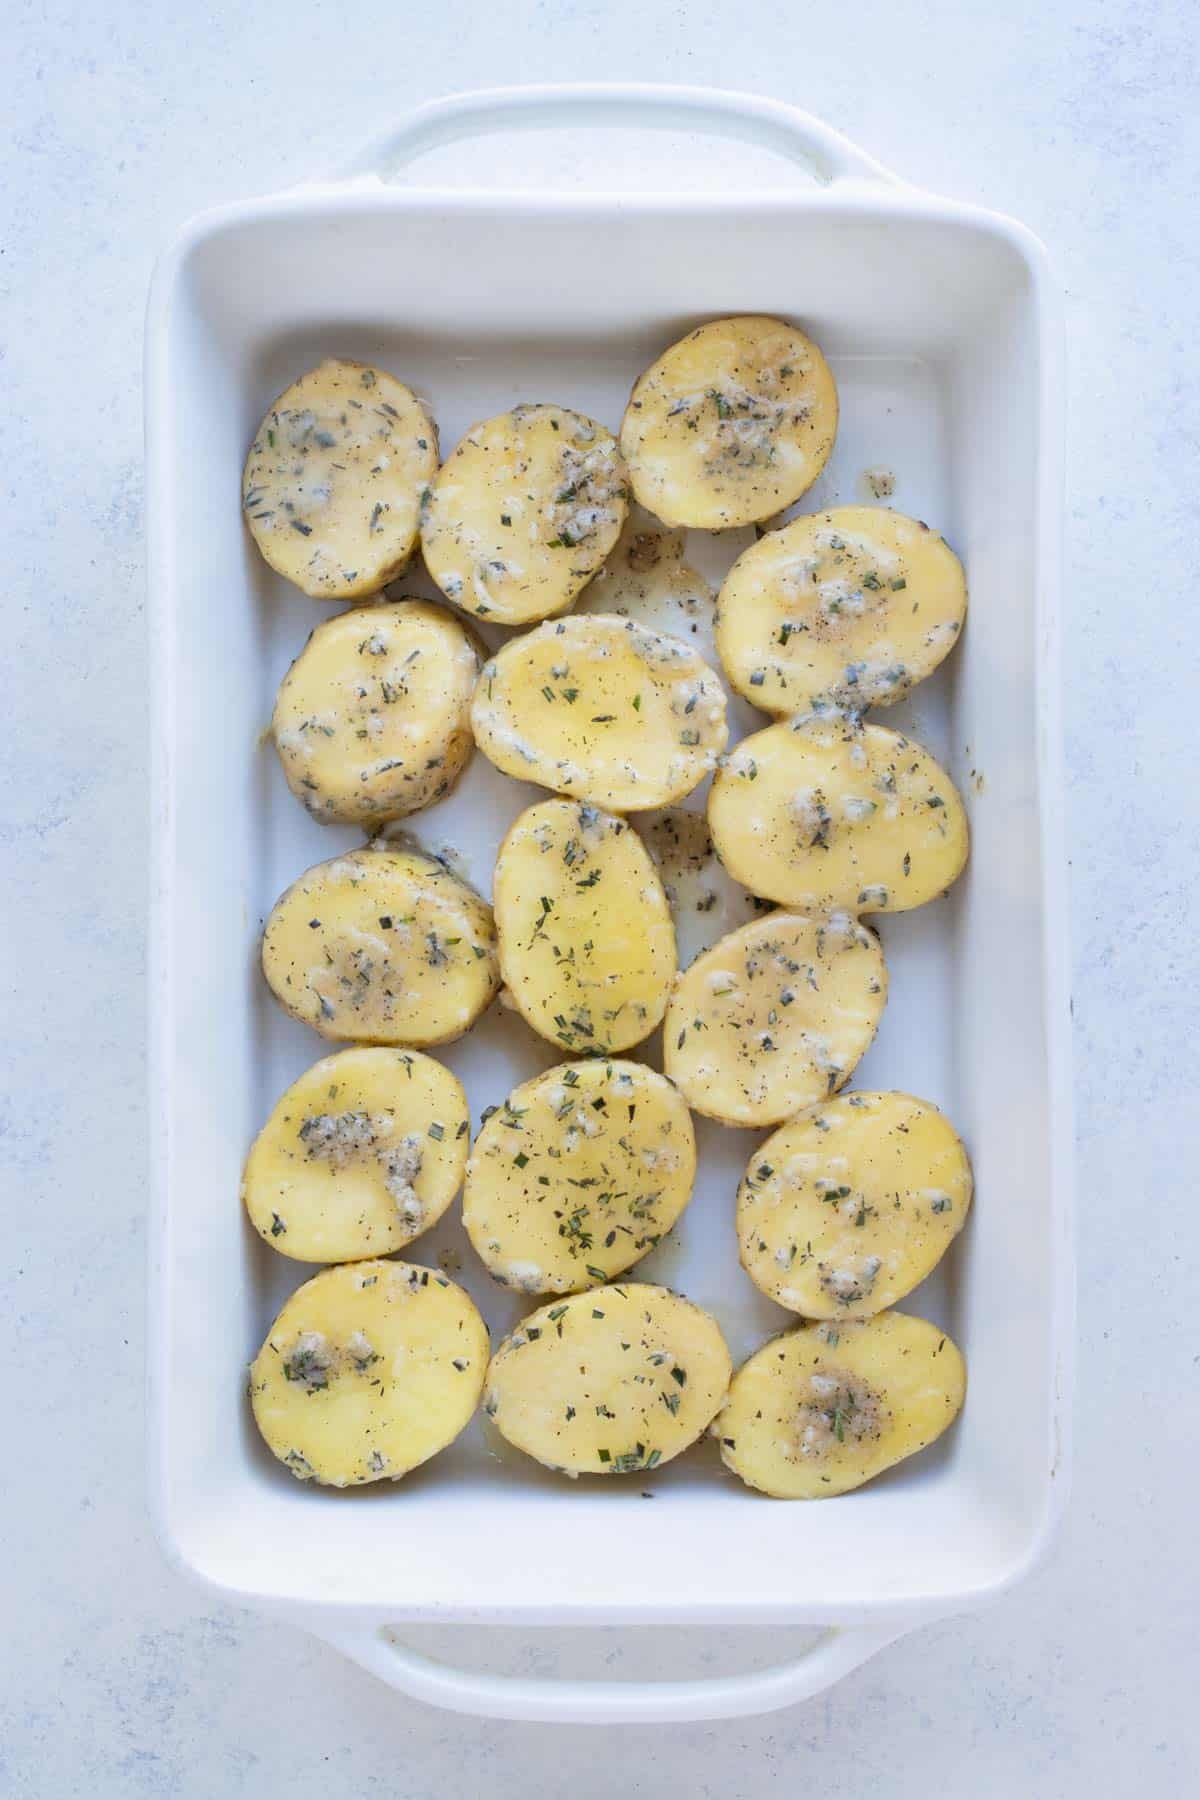 A baking dish with potatoes covered in sauce.